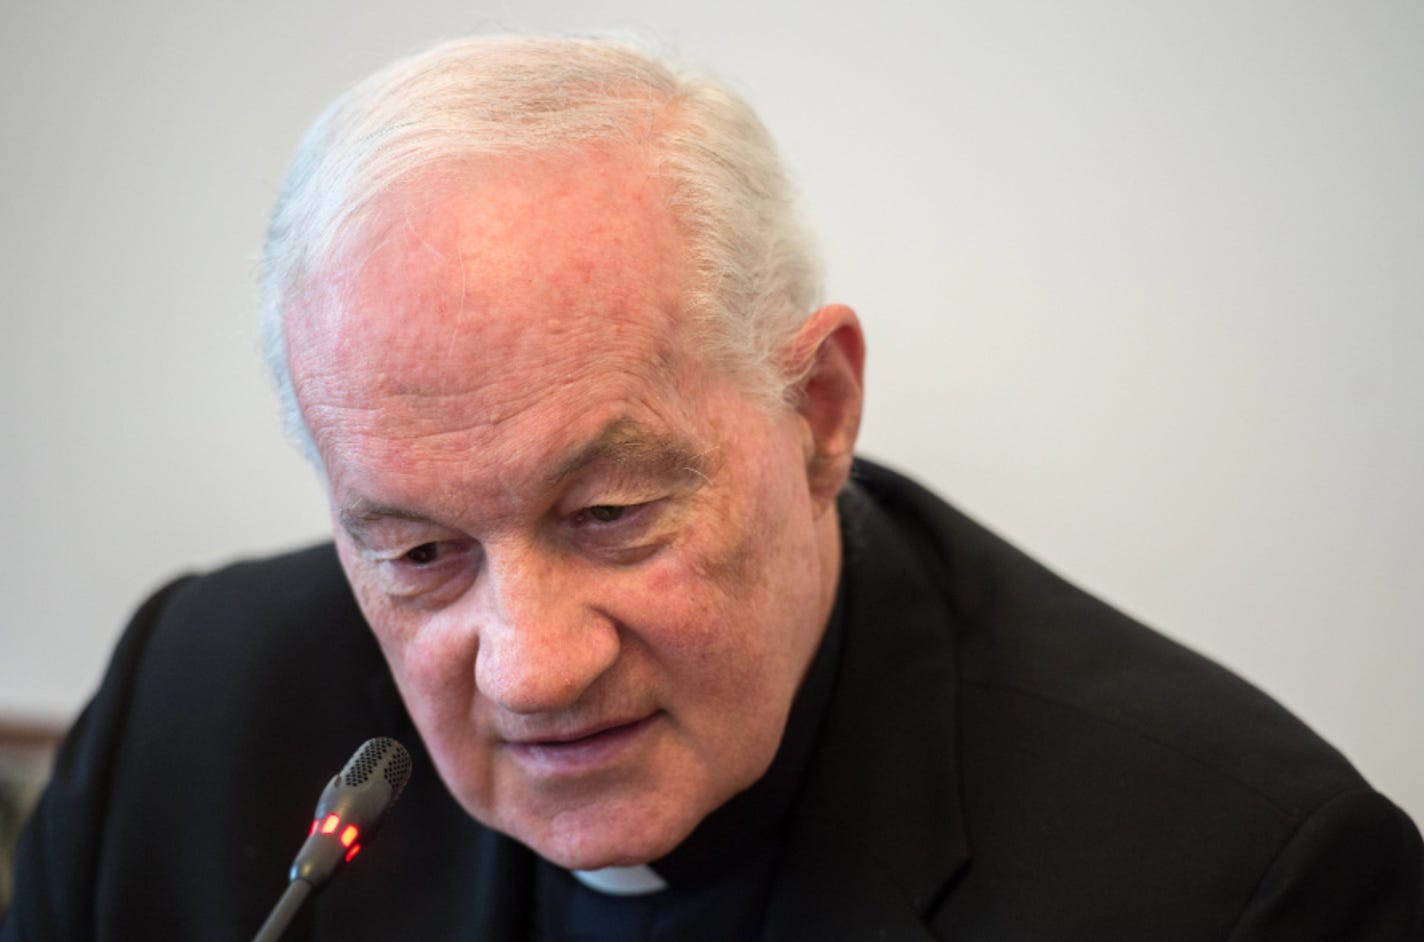 Pope Francis reviewed 2nd Cardinal Ouellet misconduct allegation